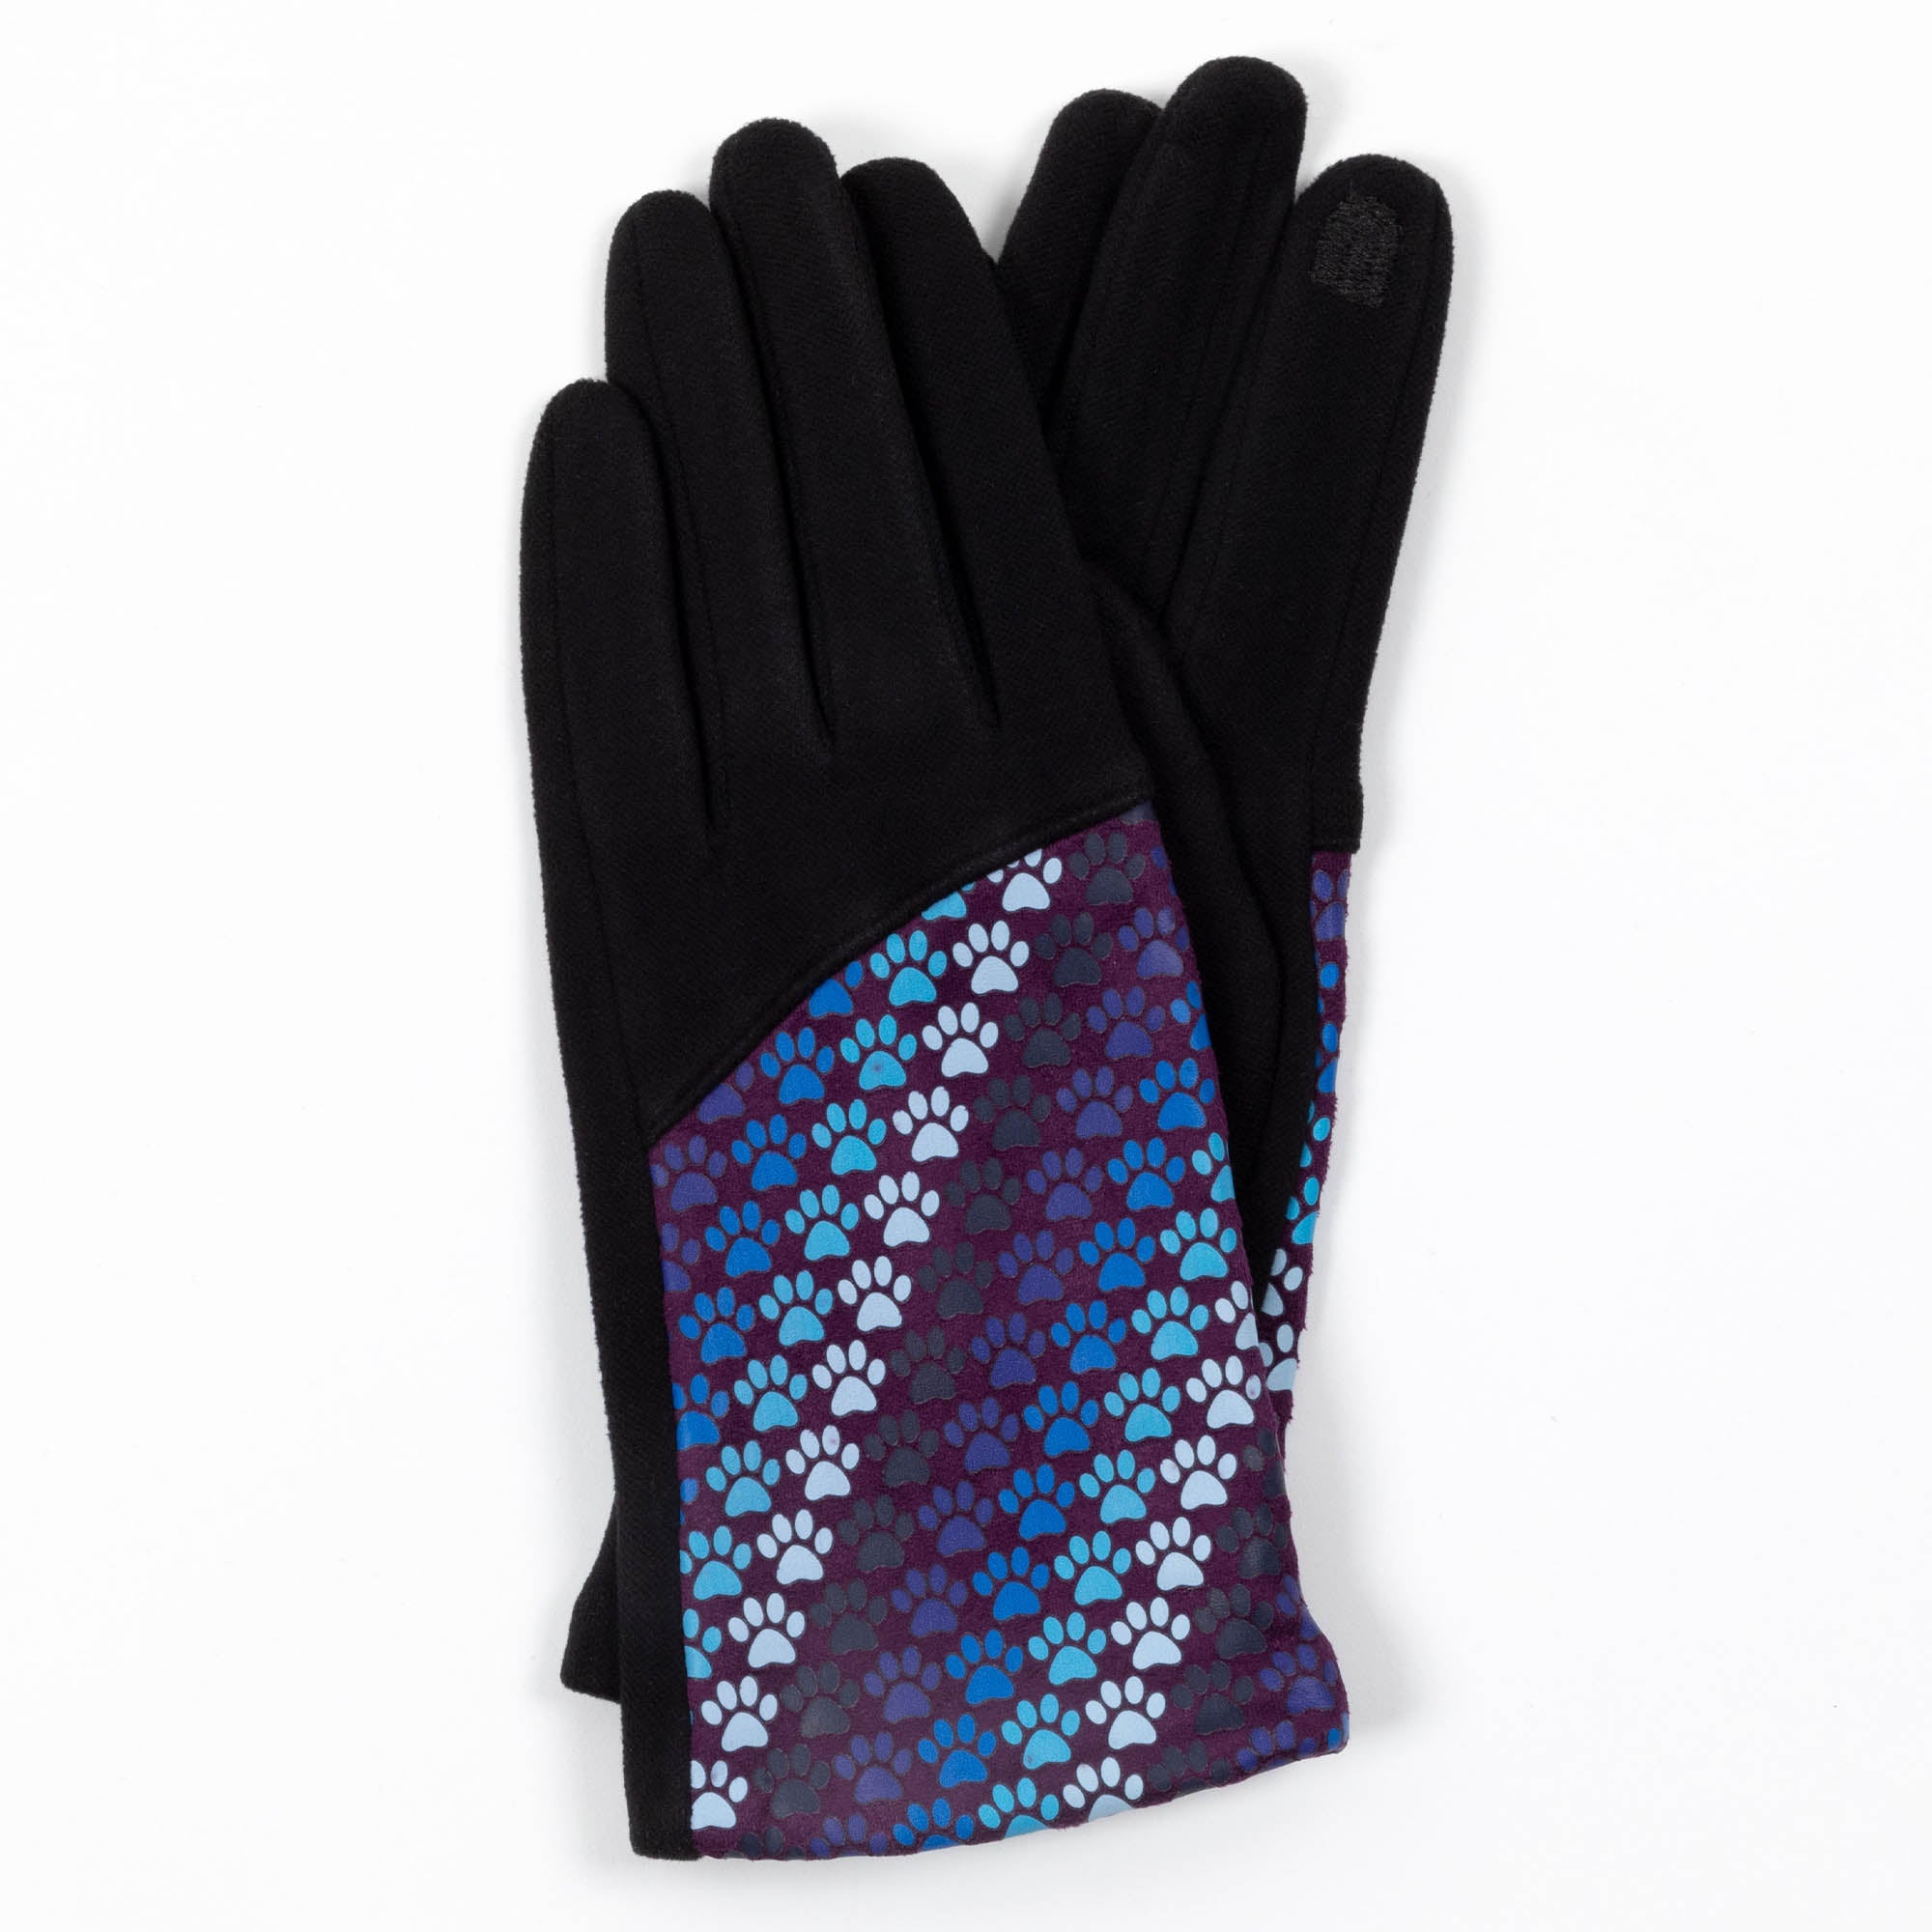 Vibrant Paws Touch Screen Gloves - Violet Paws